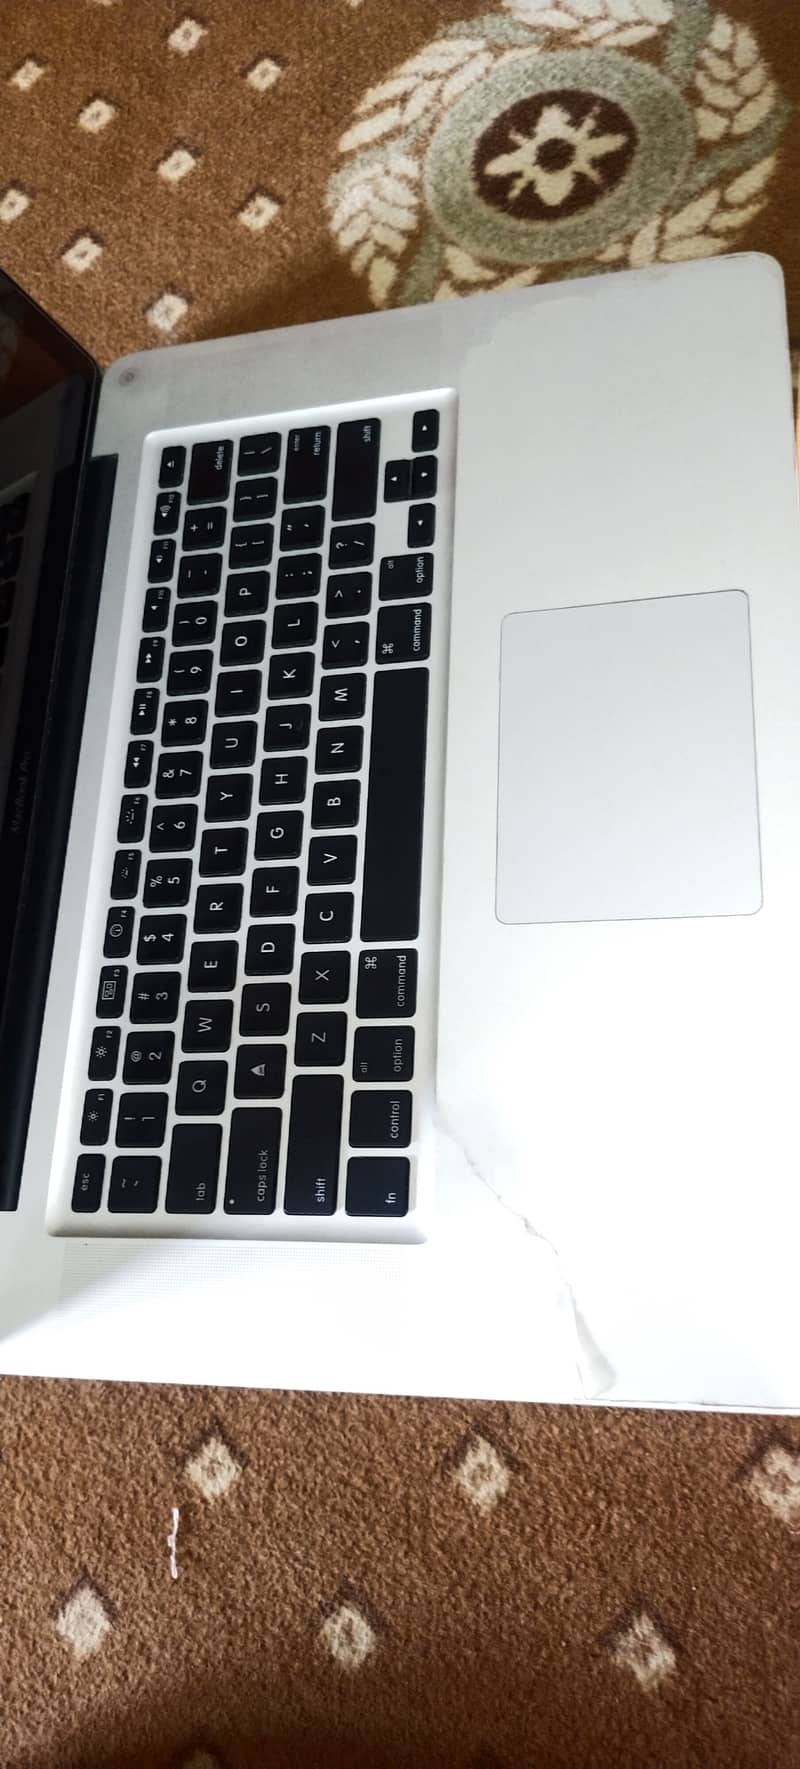 MacBook pro 2011 moled i7 very low price urgent for sale 9